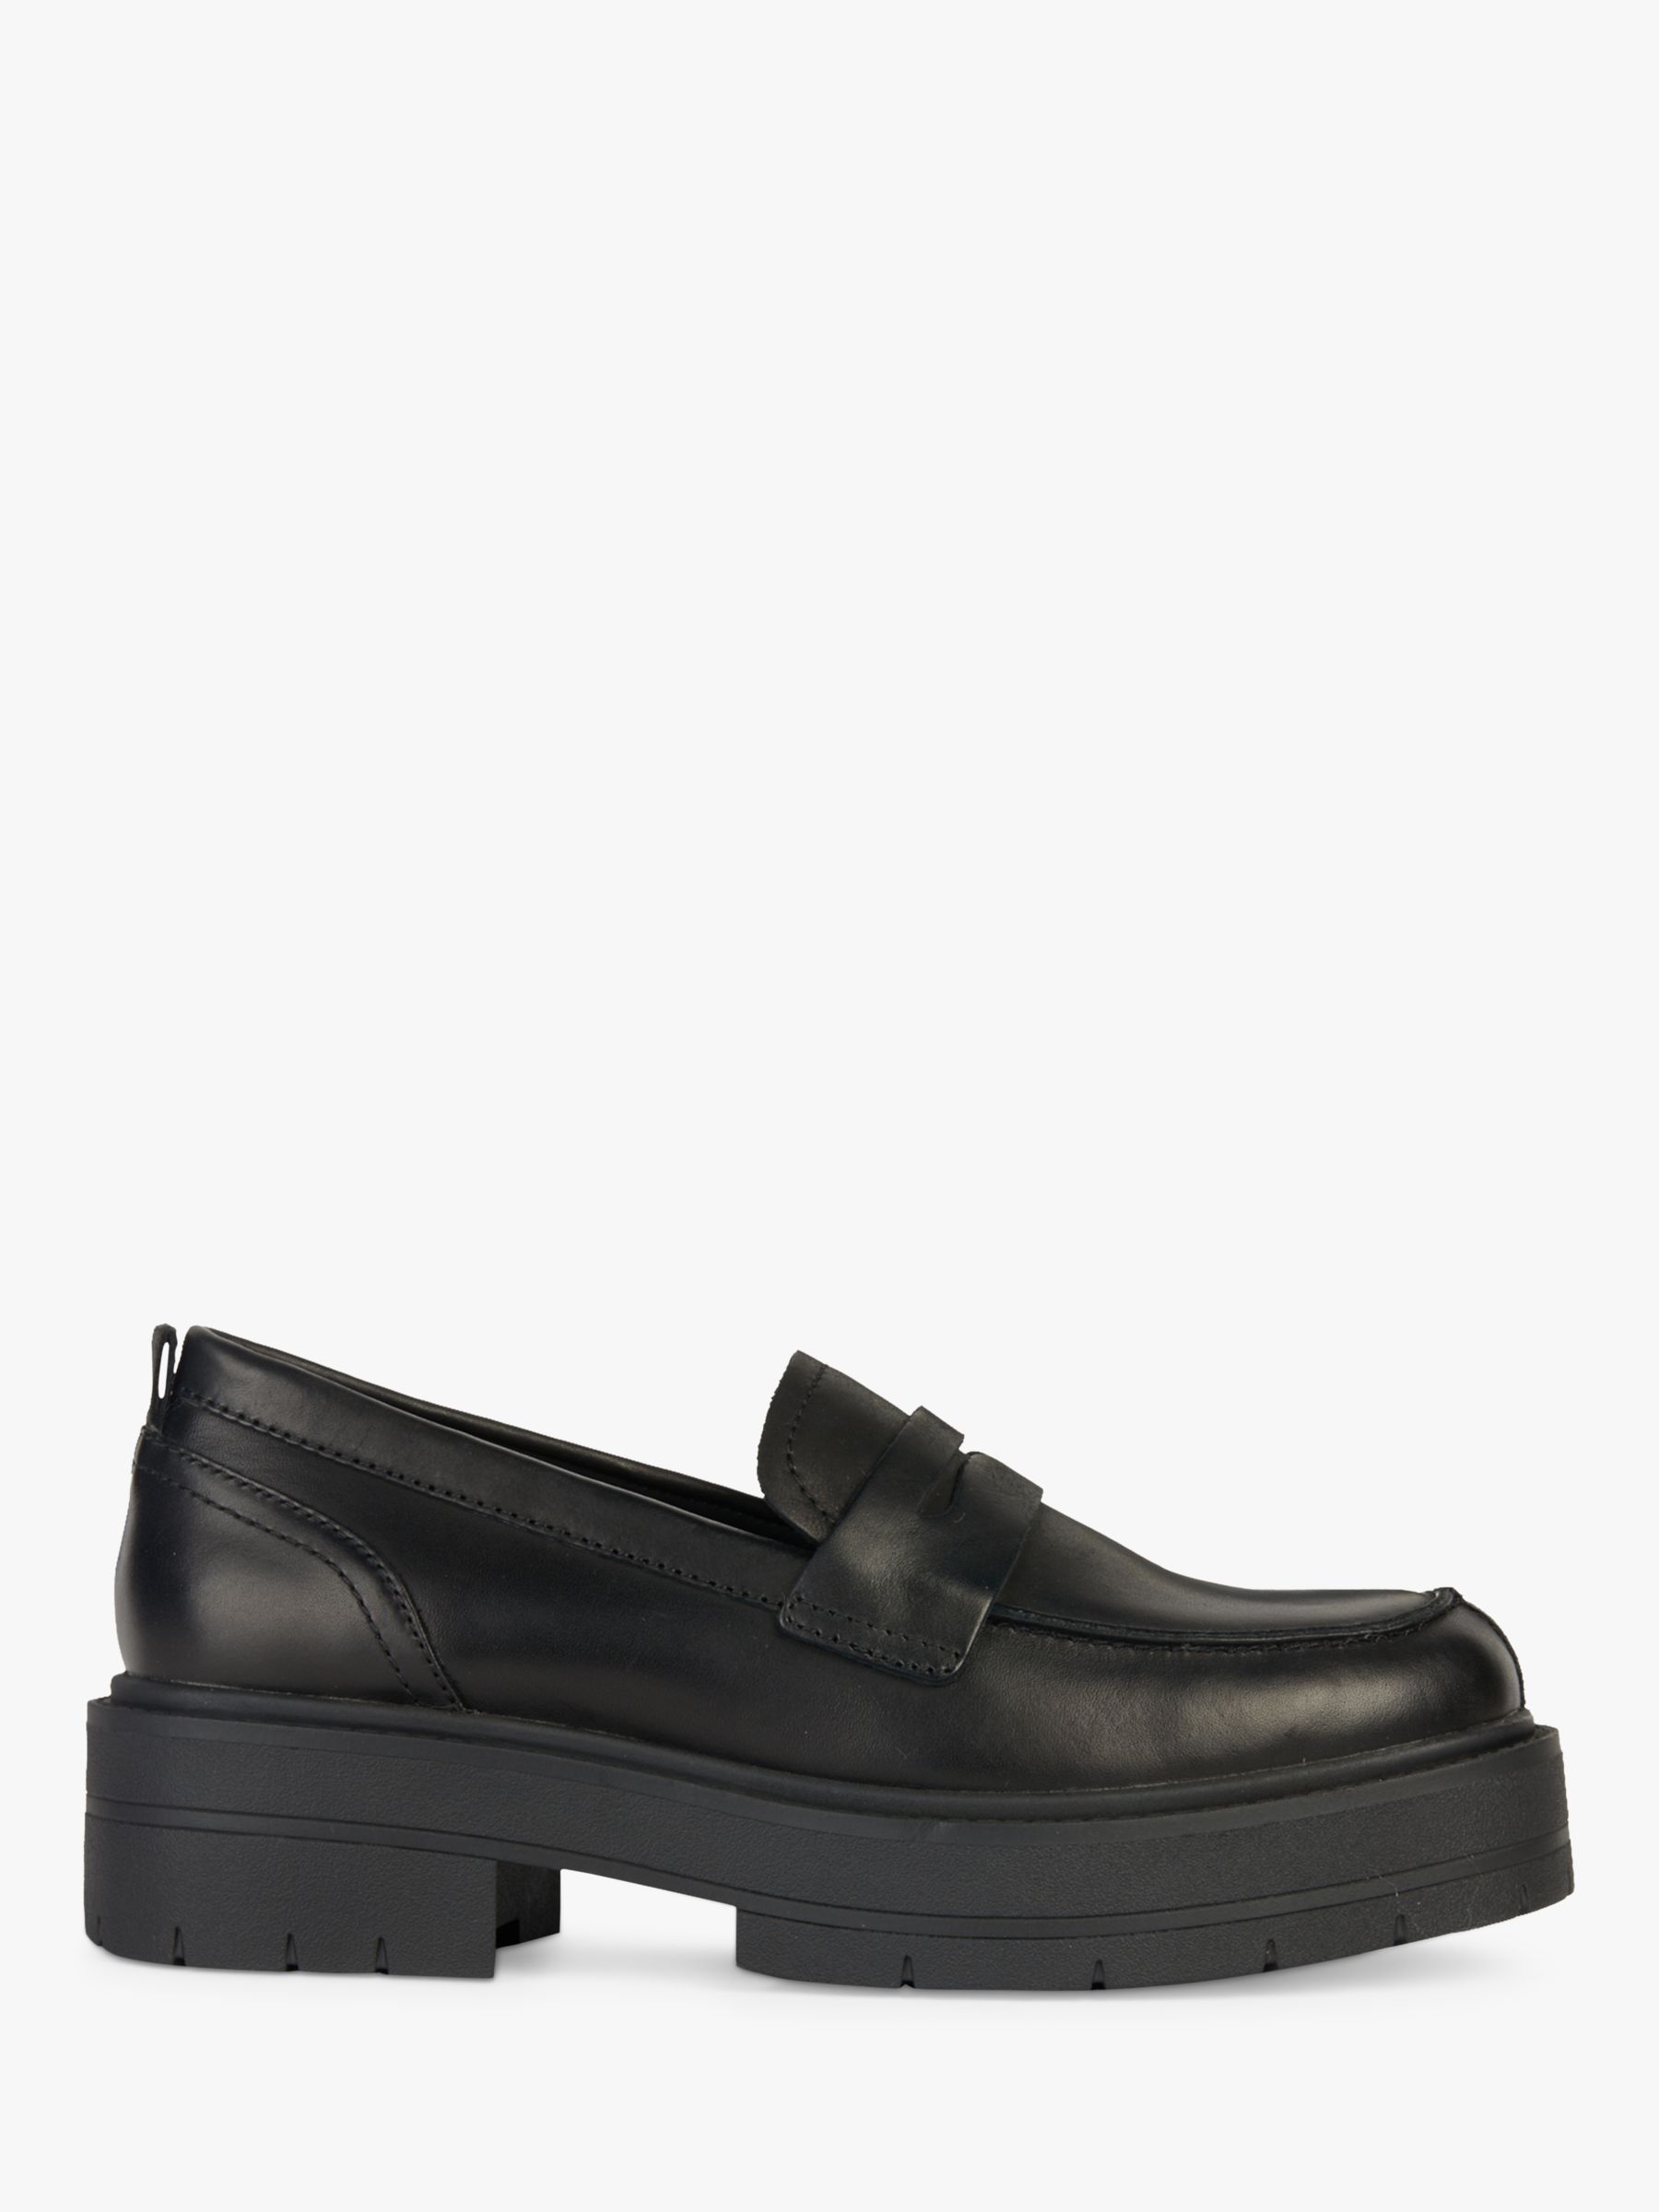 Geox D Spherica EC7 Leather Loafers, Black at John Lewis & Partners